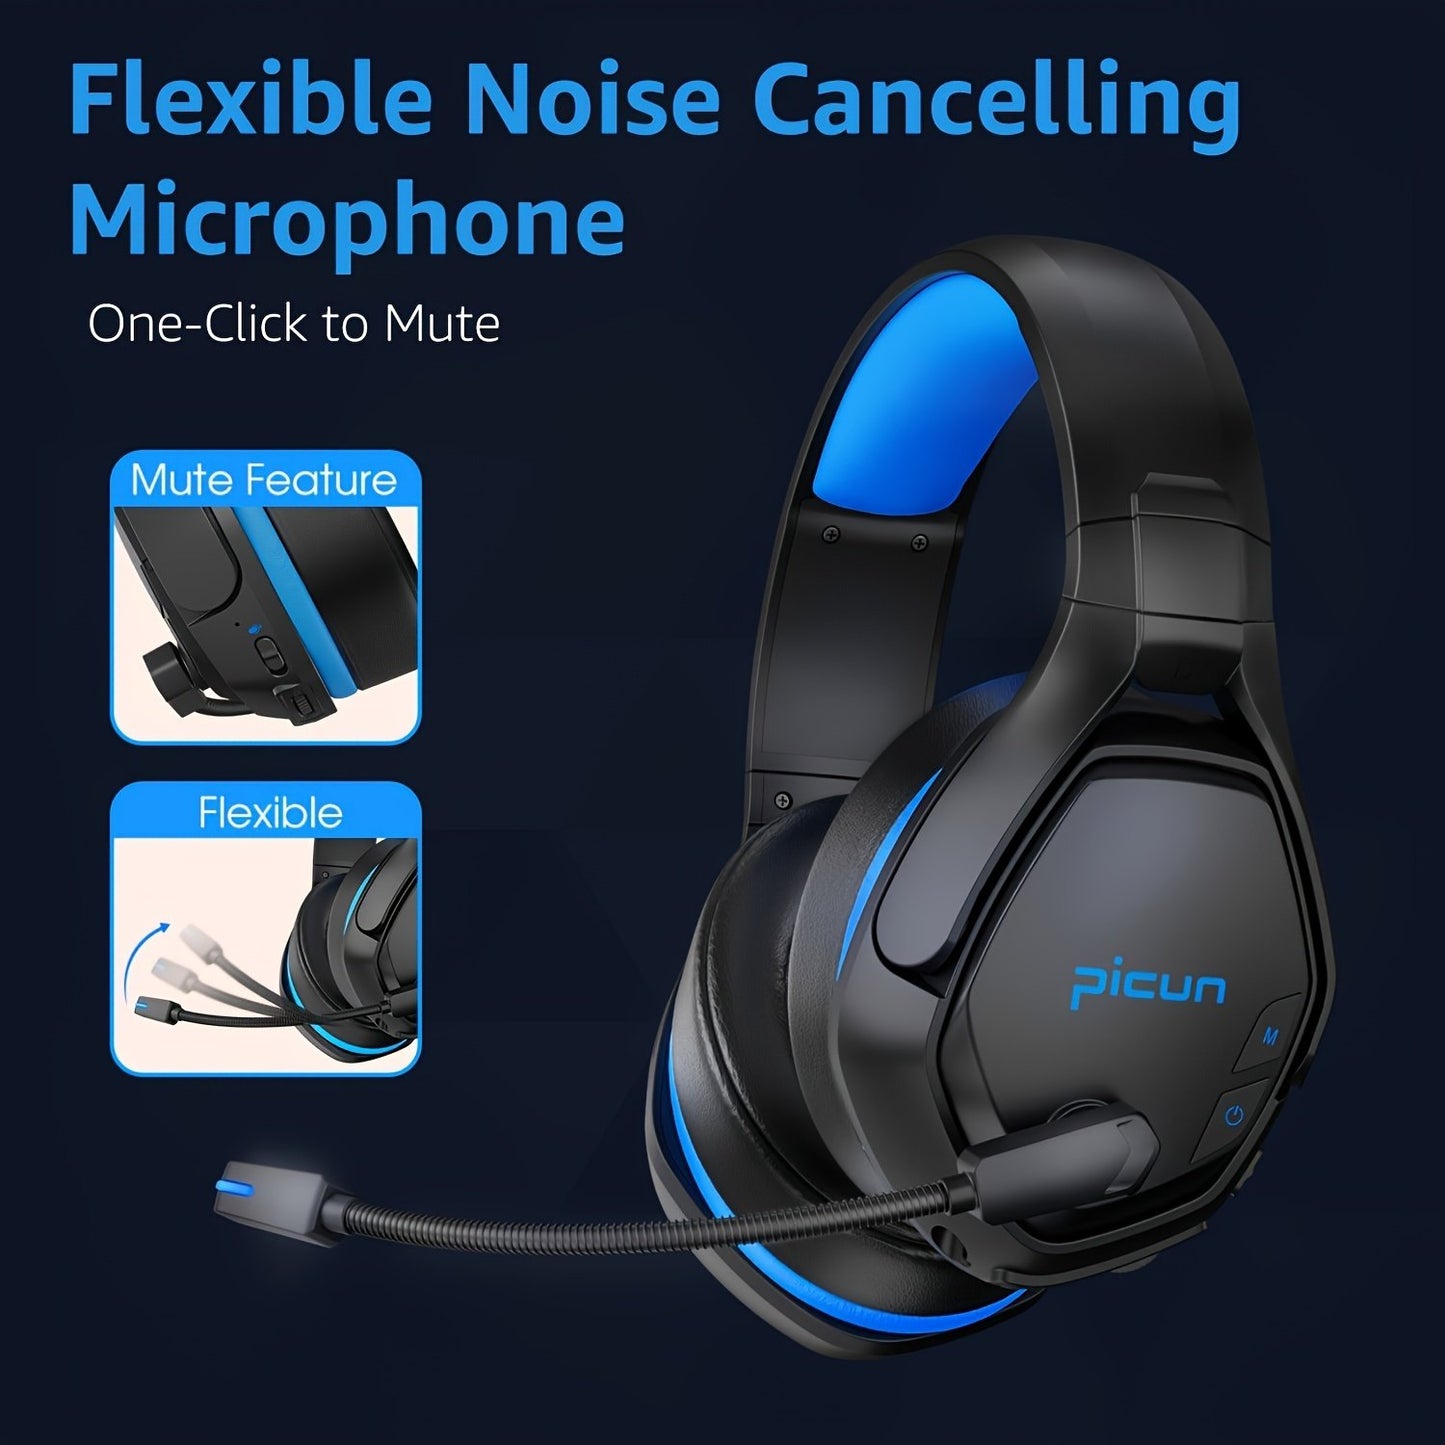 Picun PG-01 Wireless Gaming Headset for PC, PS5, PS4, MacBook, 2.4Ghz Wireless Gaming Headphones with Microphone for Laptop, Computer, 3D Surround Sound - Dynamic EQ Driver - Soft Memory Earmuffs